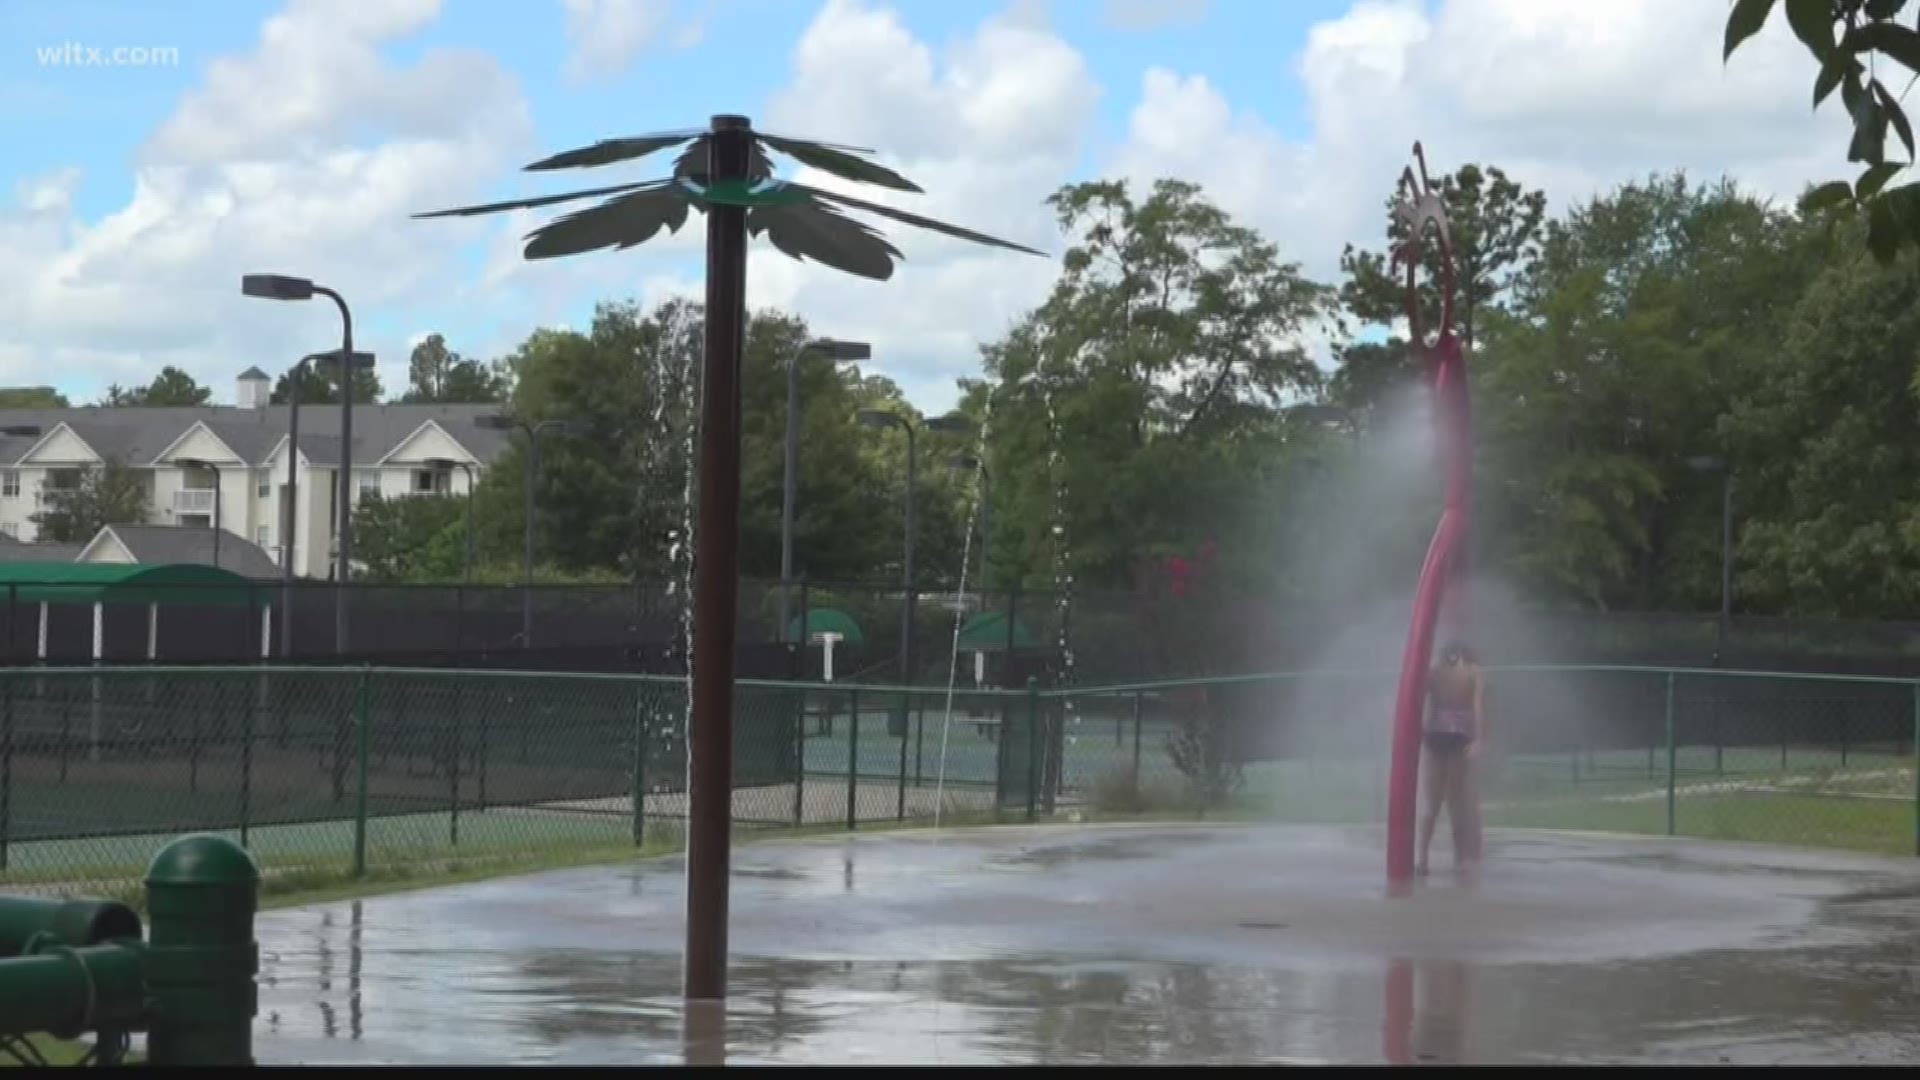 Ways to stay cool in Sumter, a list of pools and splash pads and hours of operation.